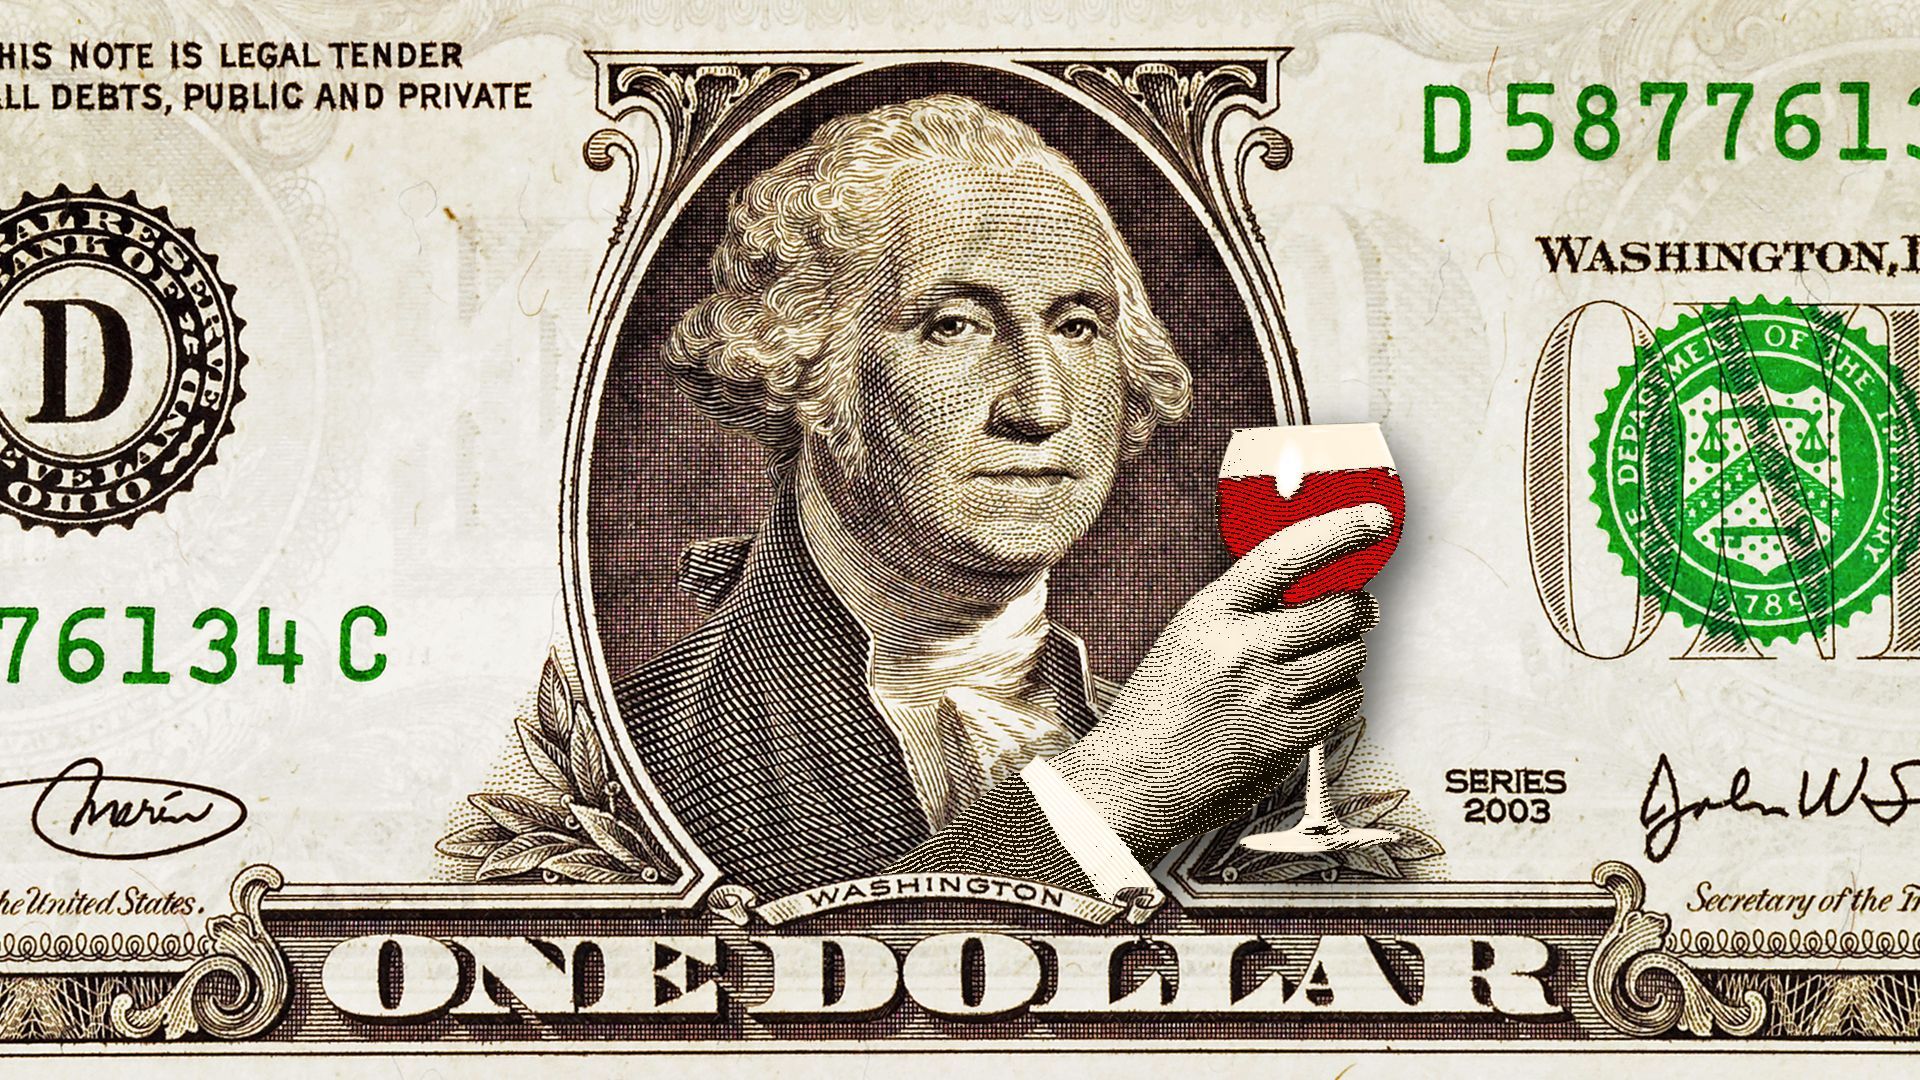 Illustration of a one-dollar bill with George Washington holding a glass of red wine.